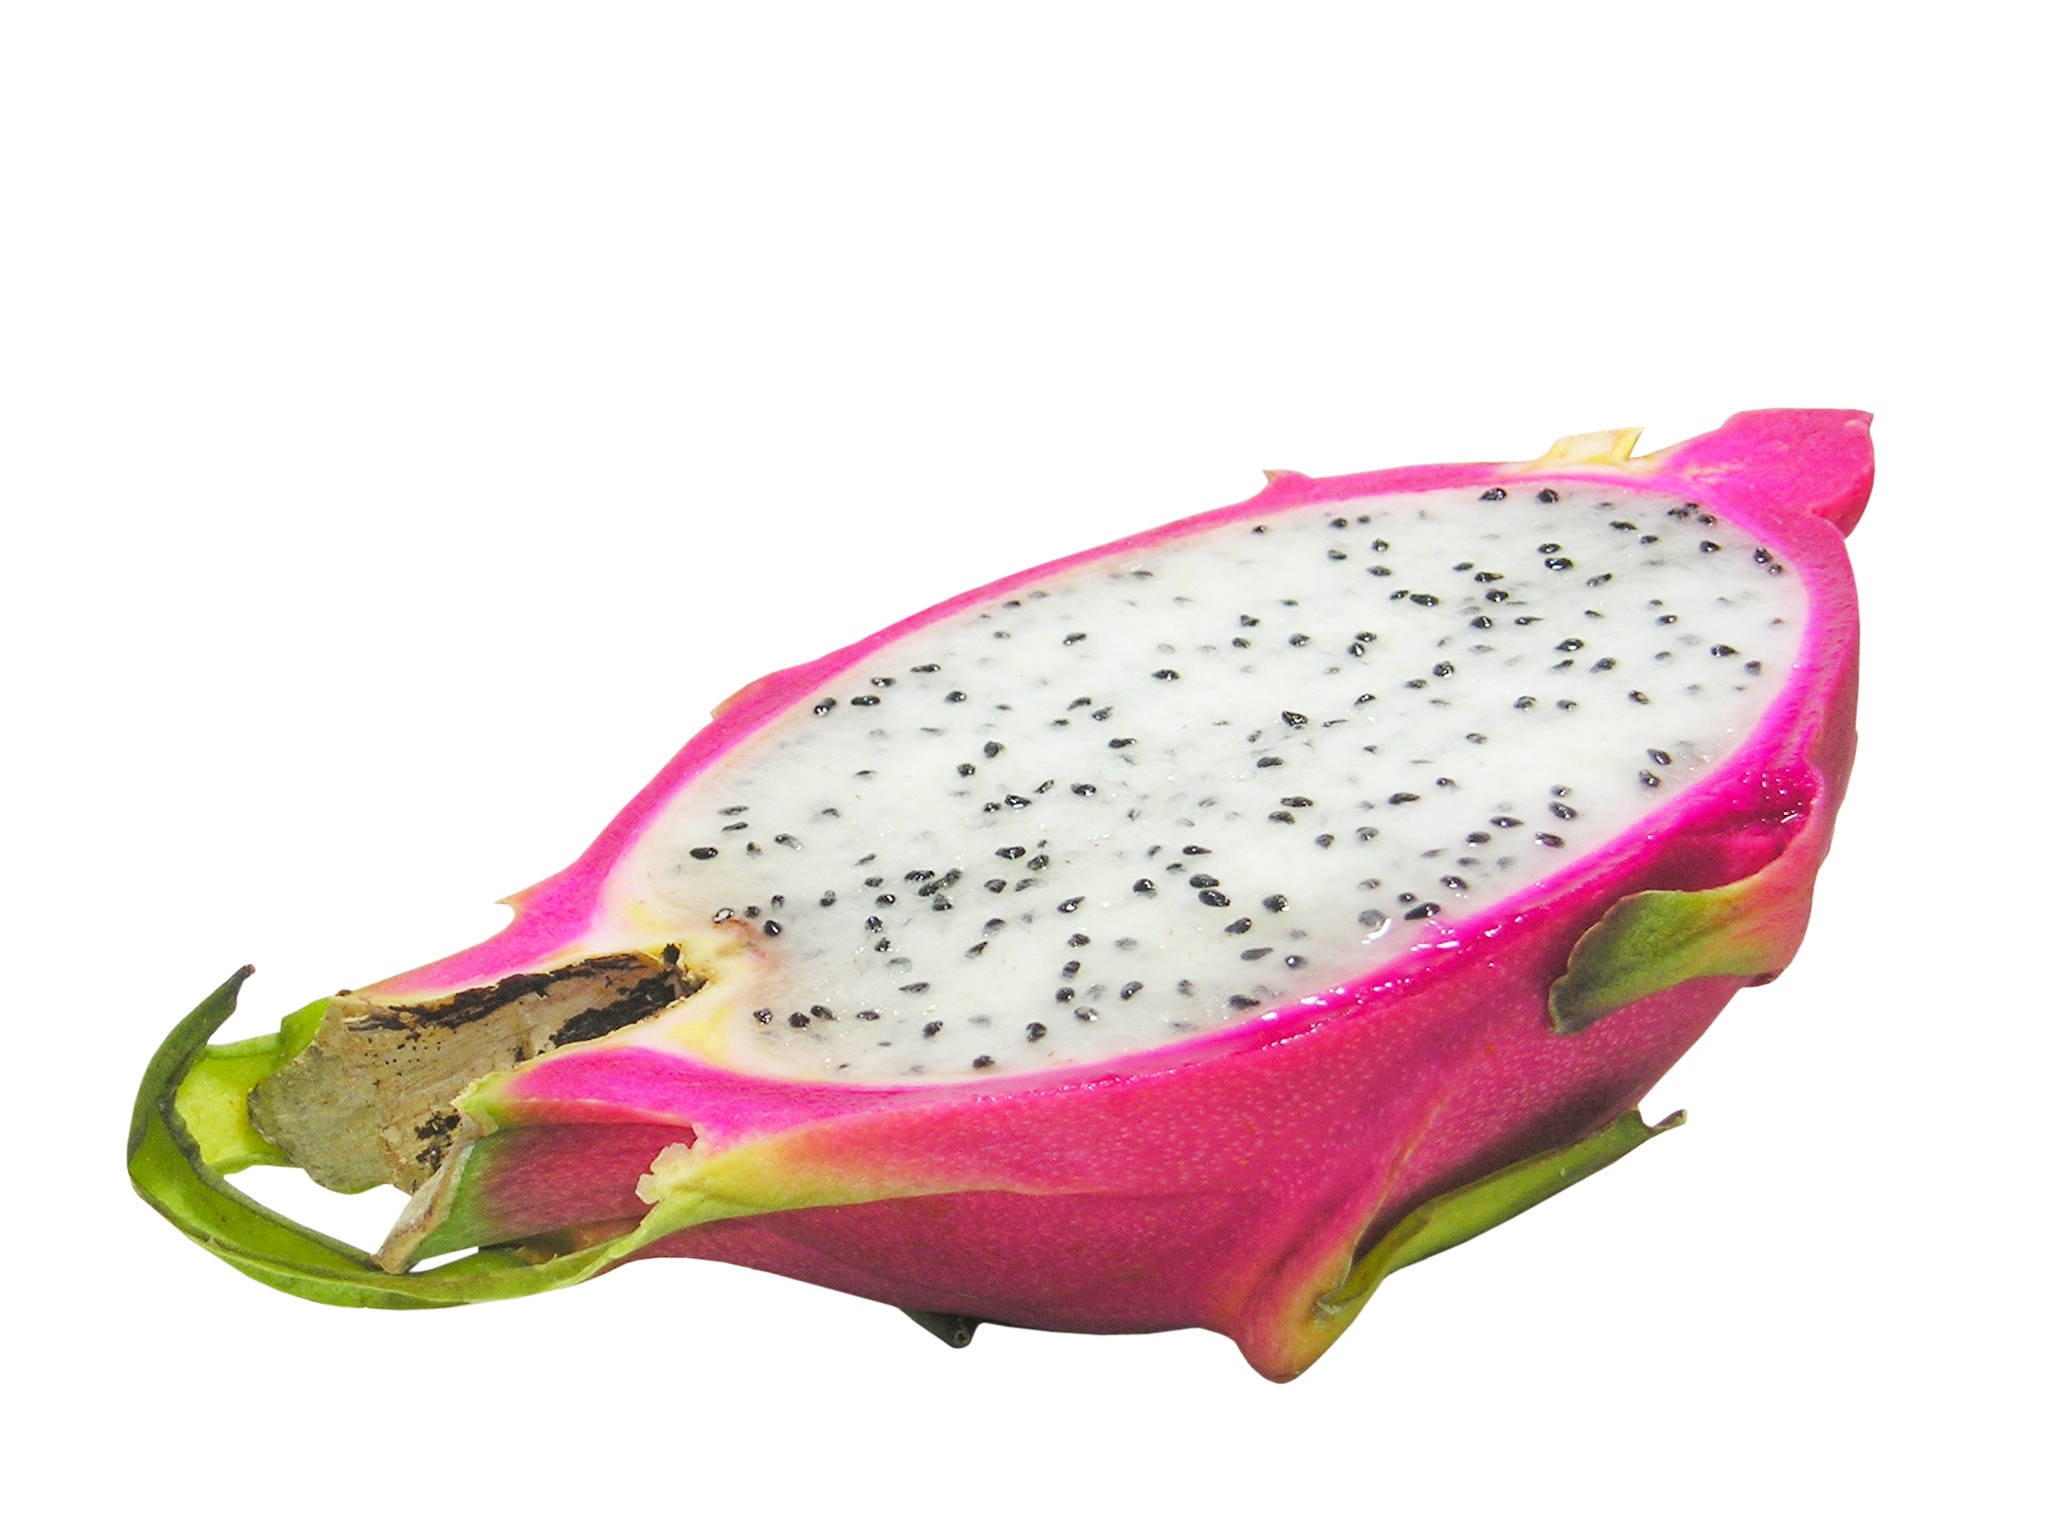 a dragon fruit cut in half to eat